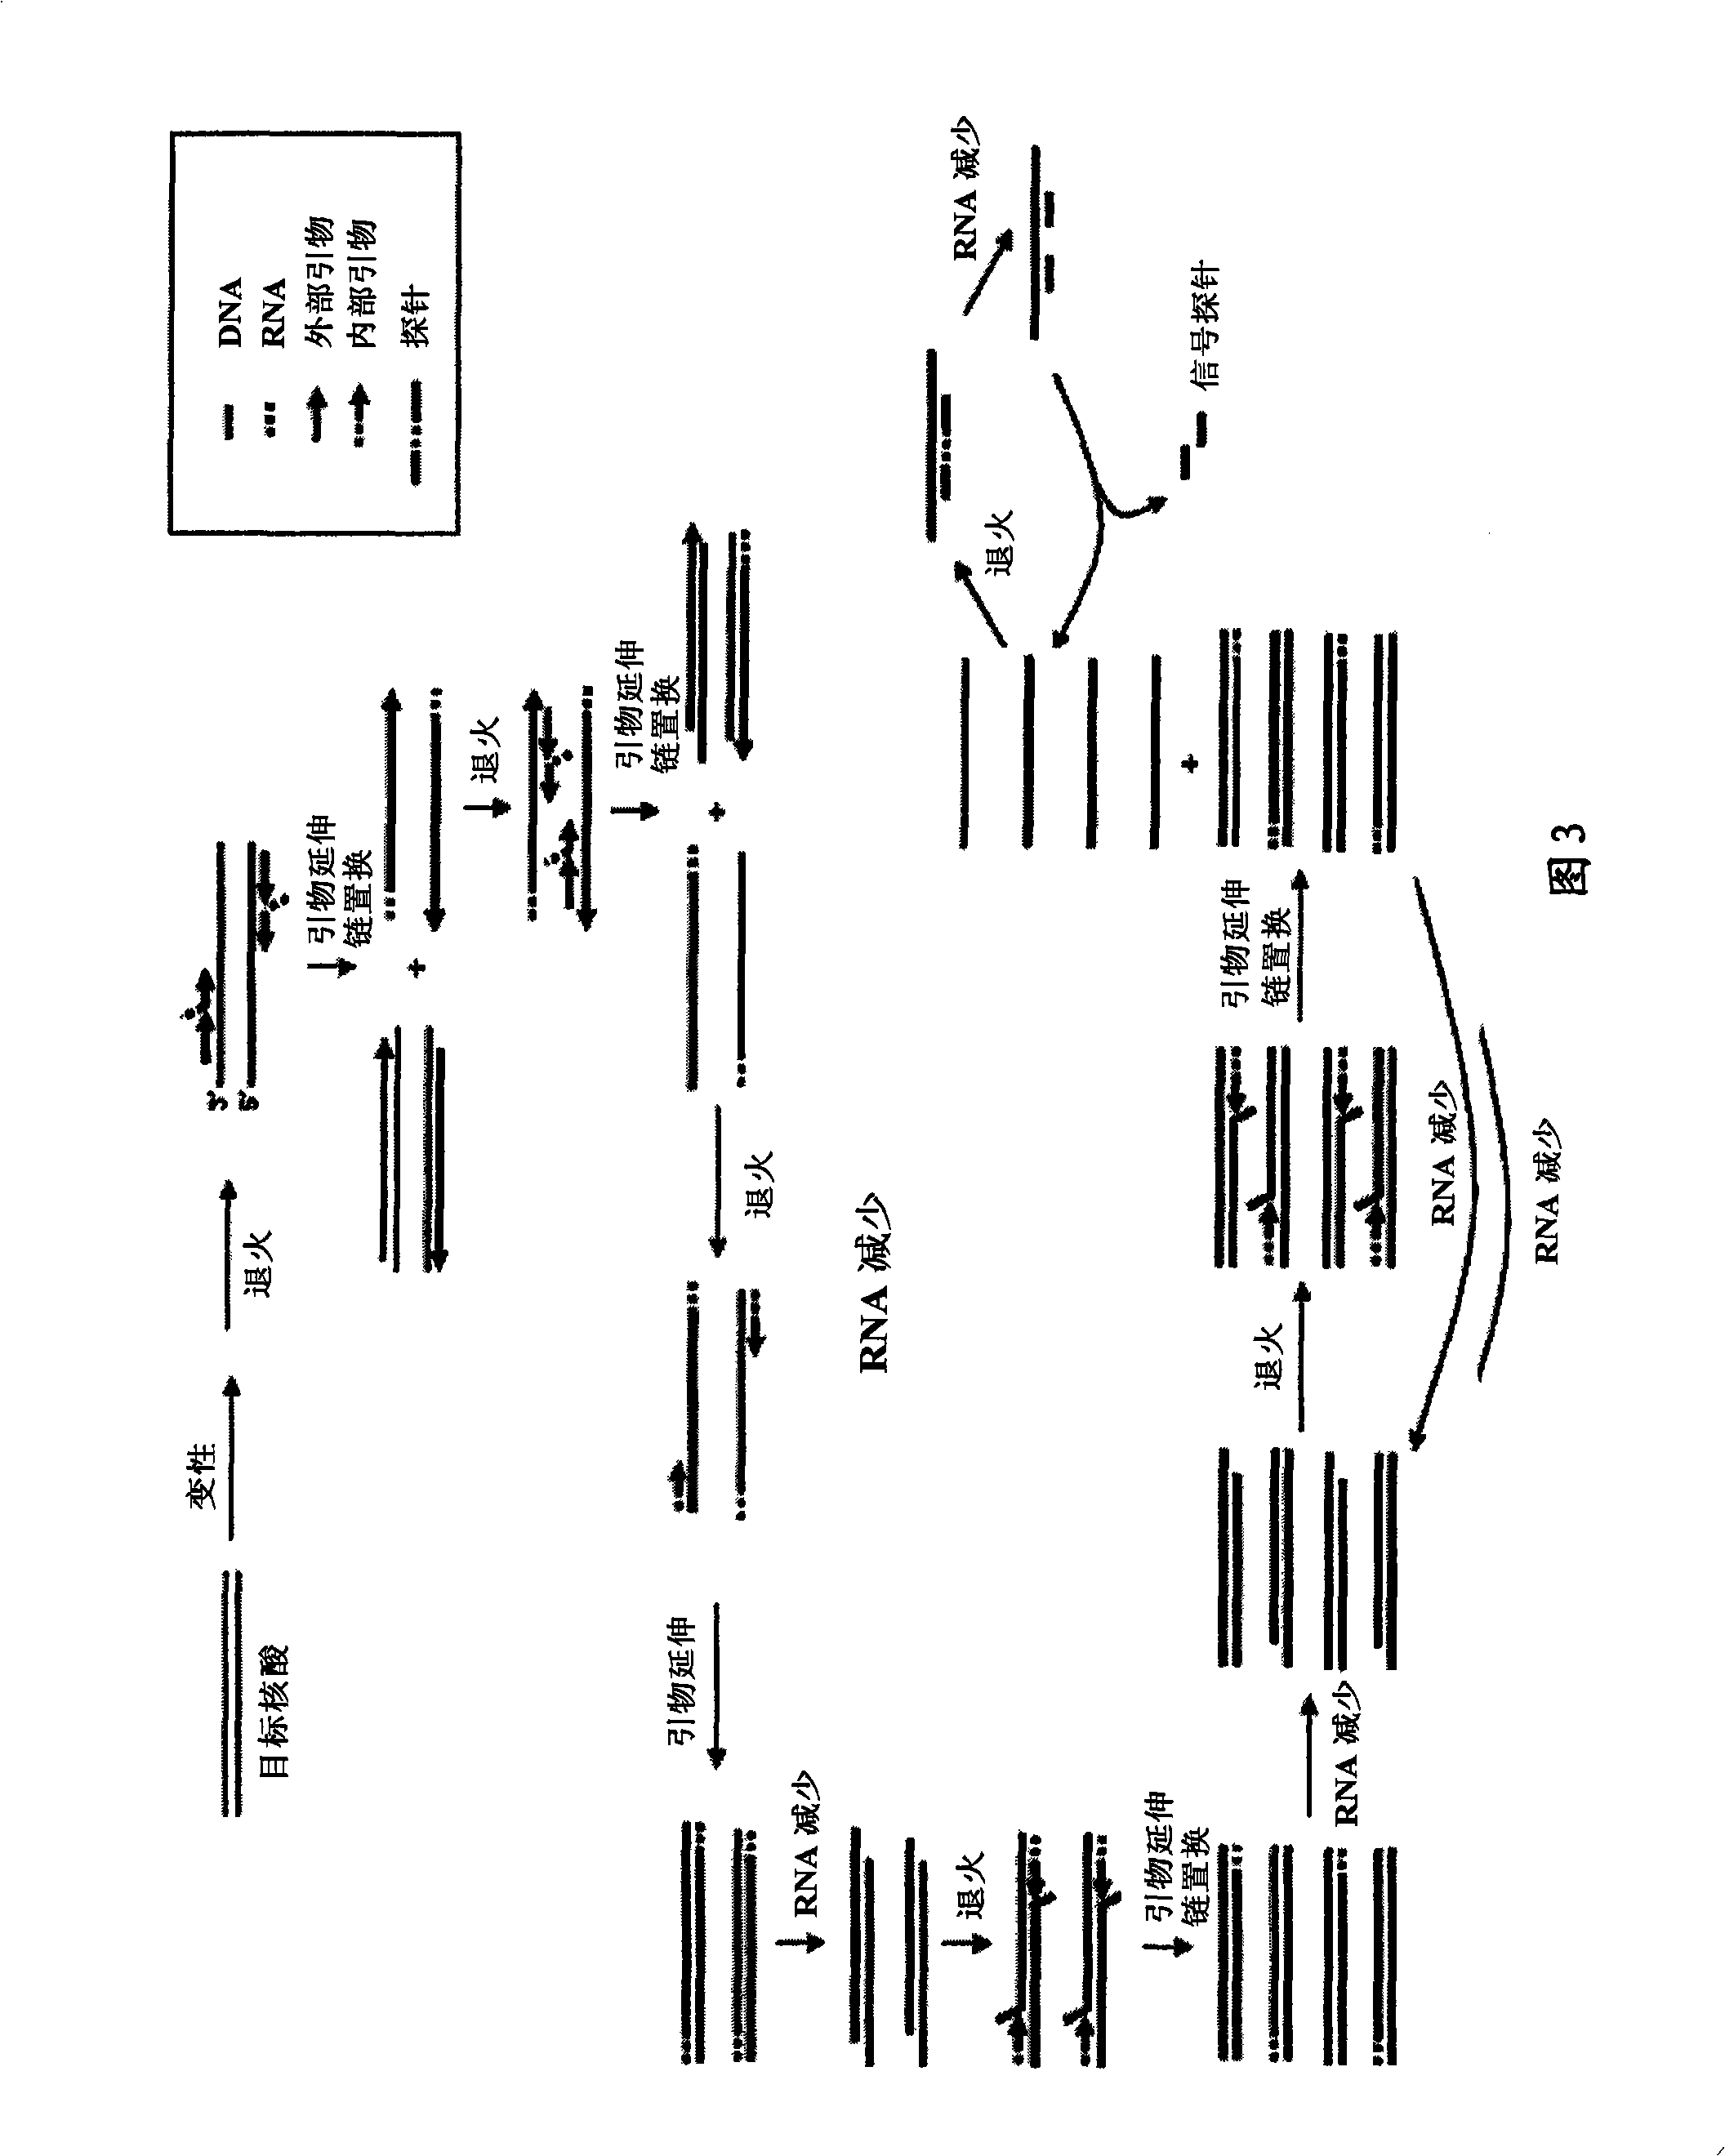 Method for isothermal amplification of nucleic acids and method for detecting nucleic acids using simultaneous isothermal amplification of nucleic acids